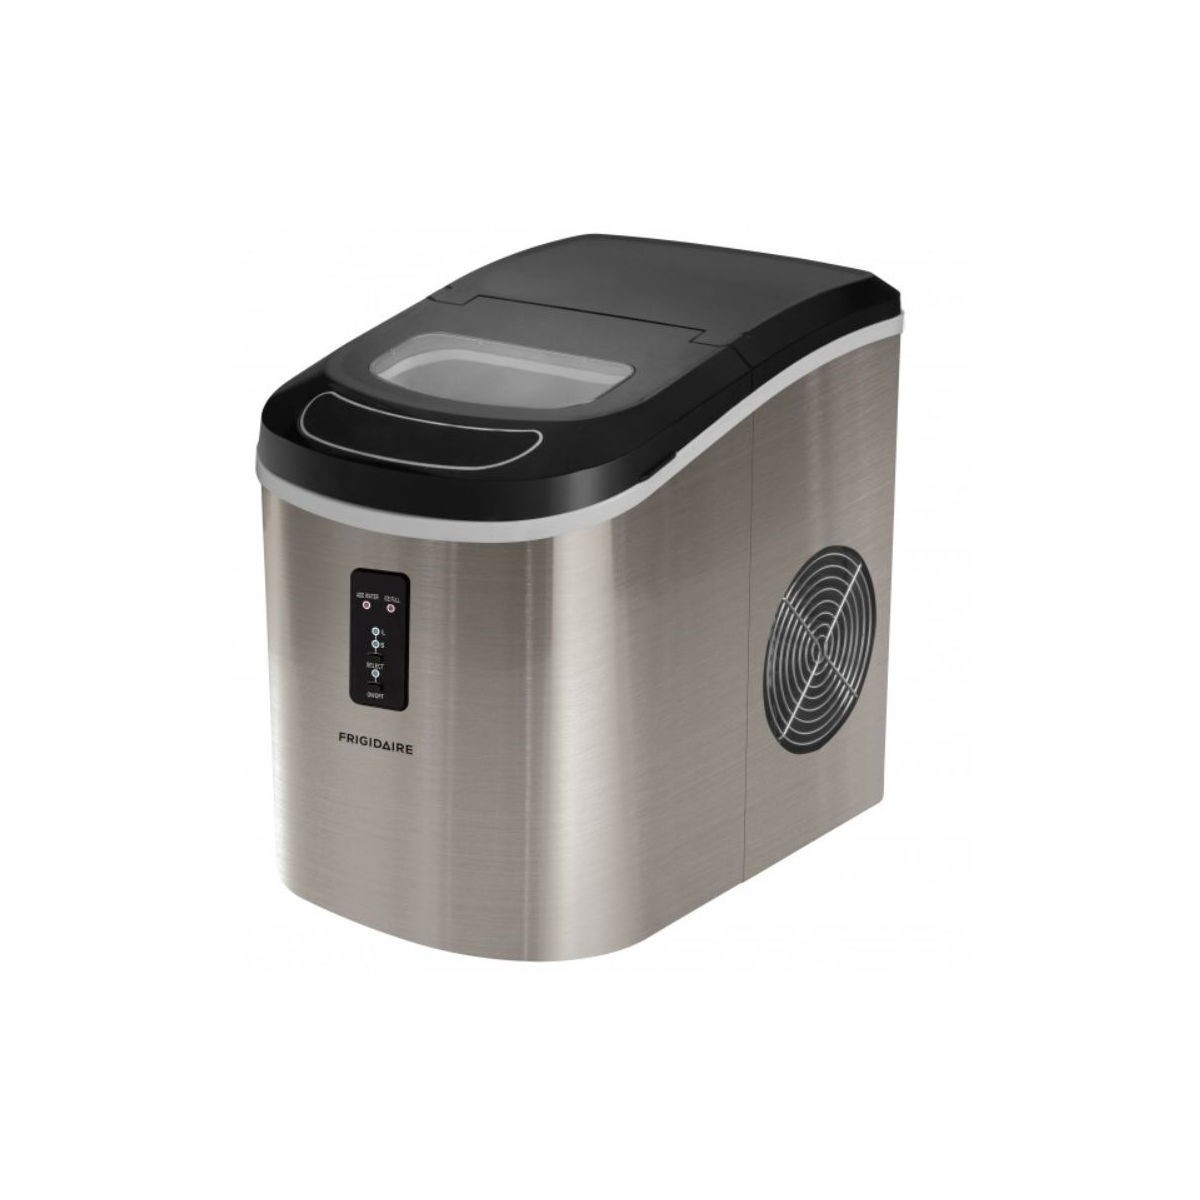 Frigidaire EFIC106-SS stainless IceMaker